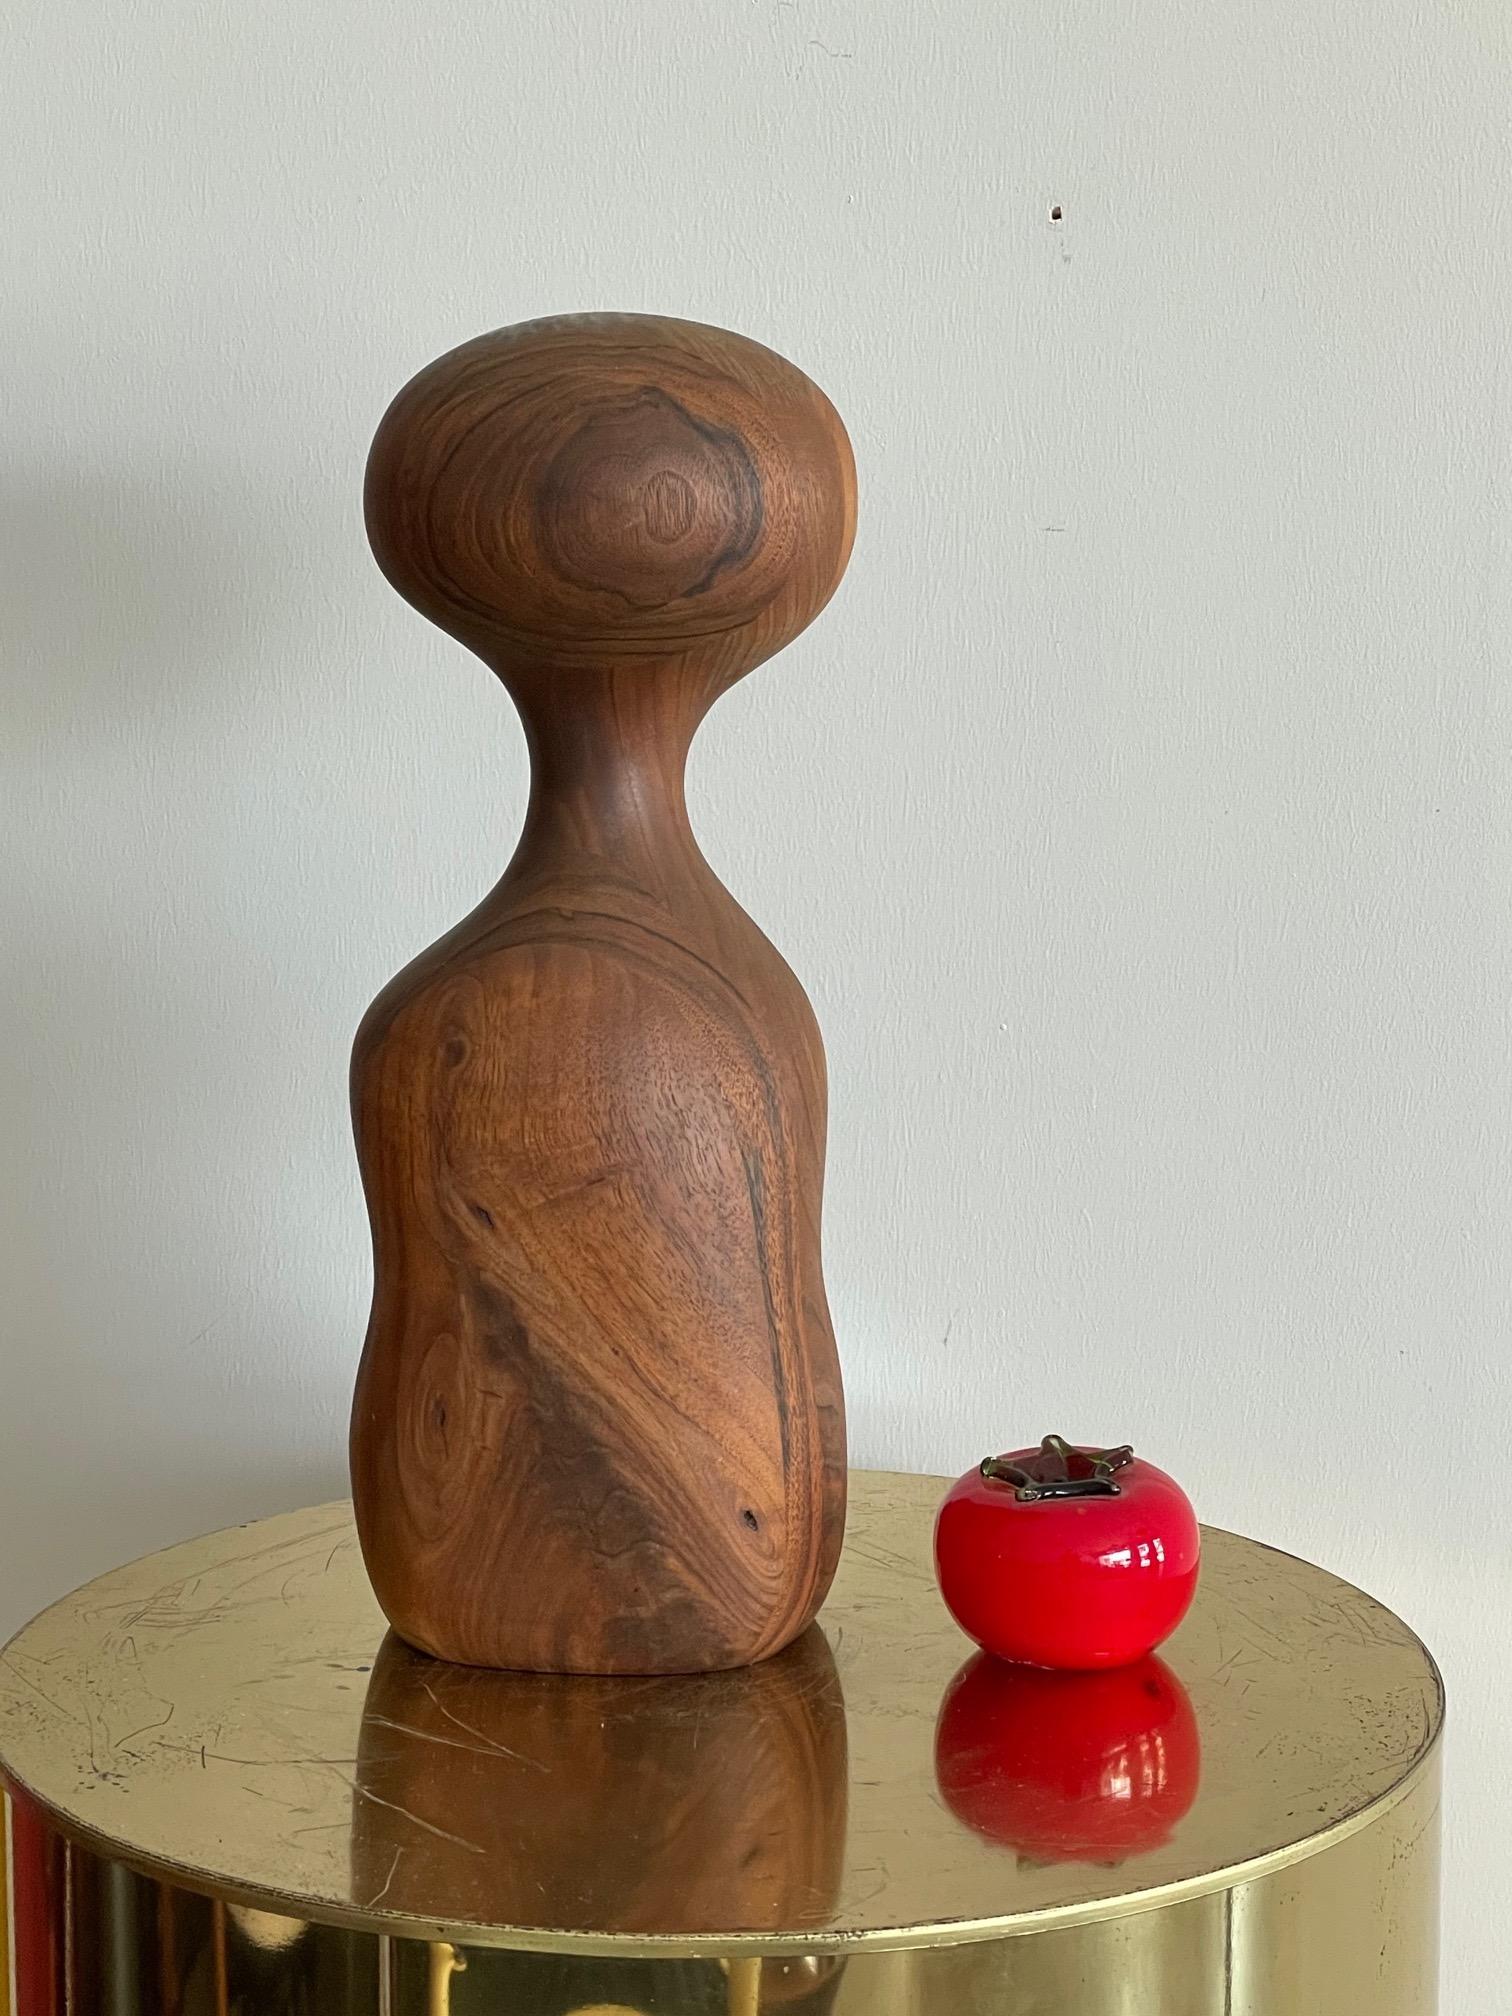 An unusual, laminated walnut sculpture by Margery Goldberg, 1978. 
Margery E. Goldberg (born 1950) is an American artist, art curator, city arts commissioner, and activist. She is best known as the founder and curator of Zenith Gallery in